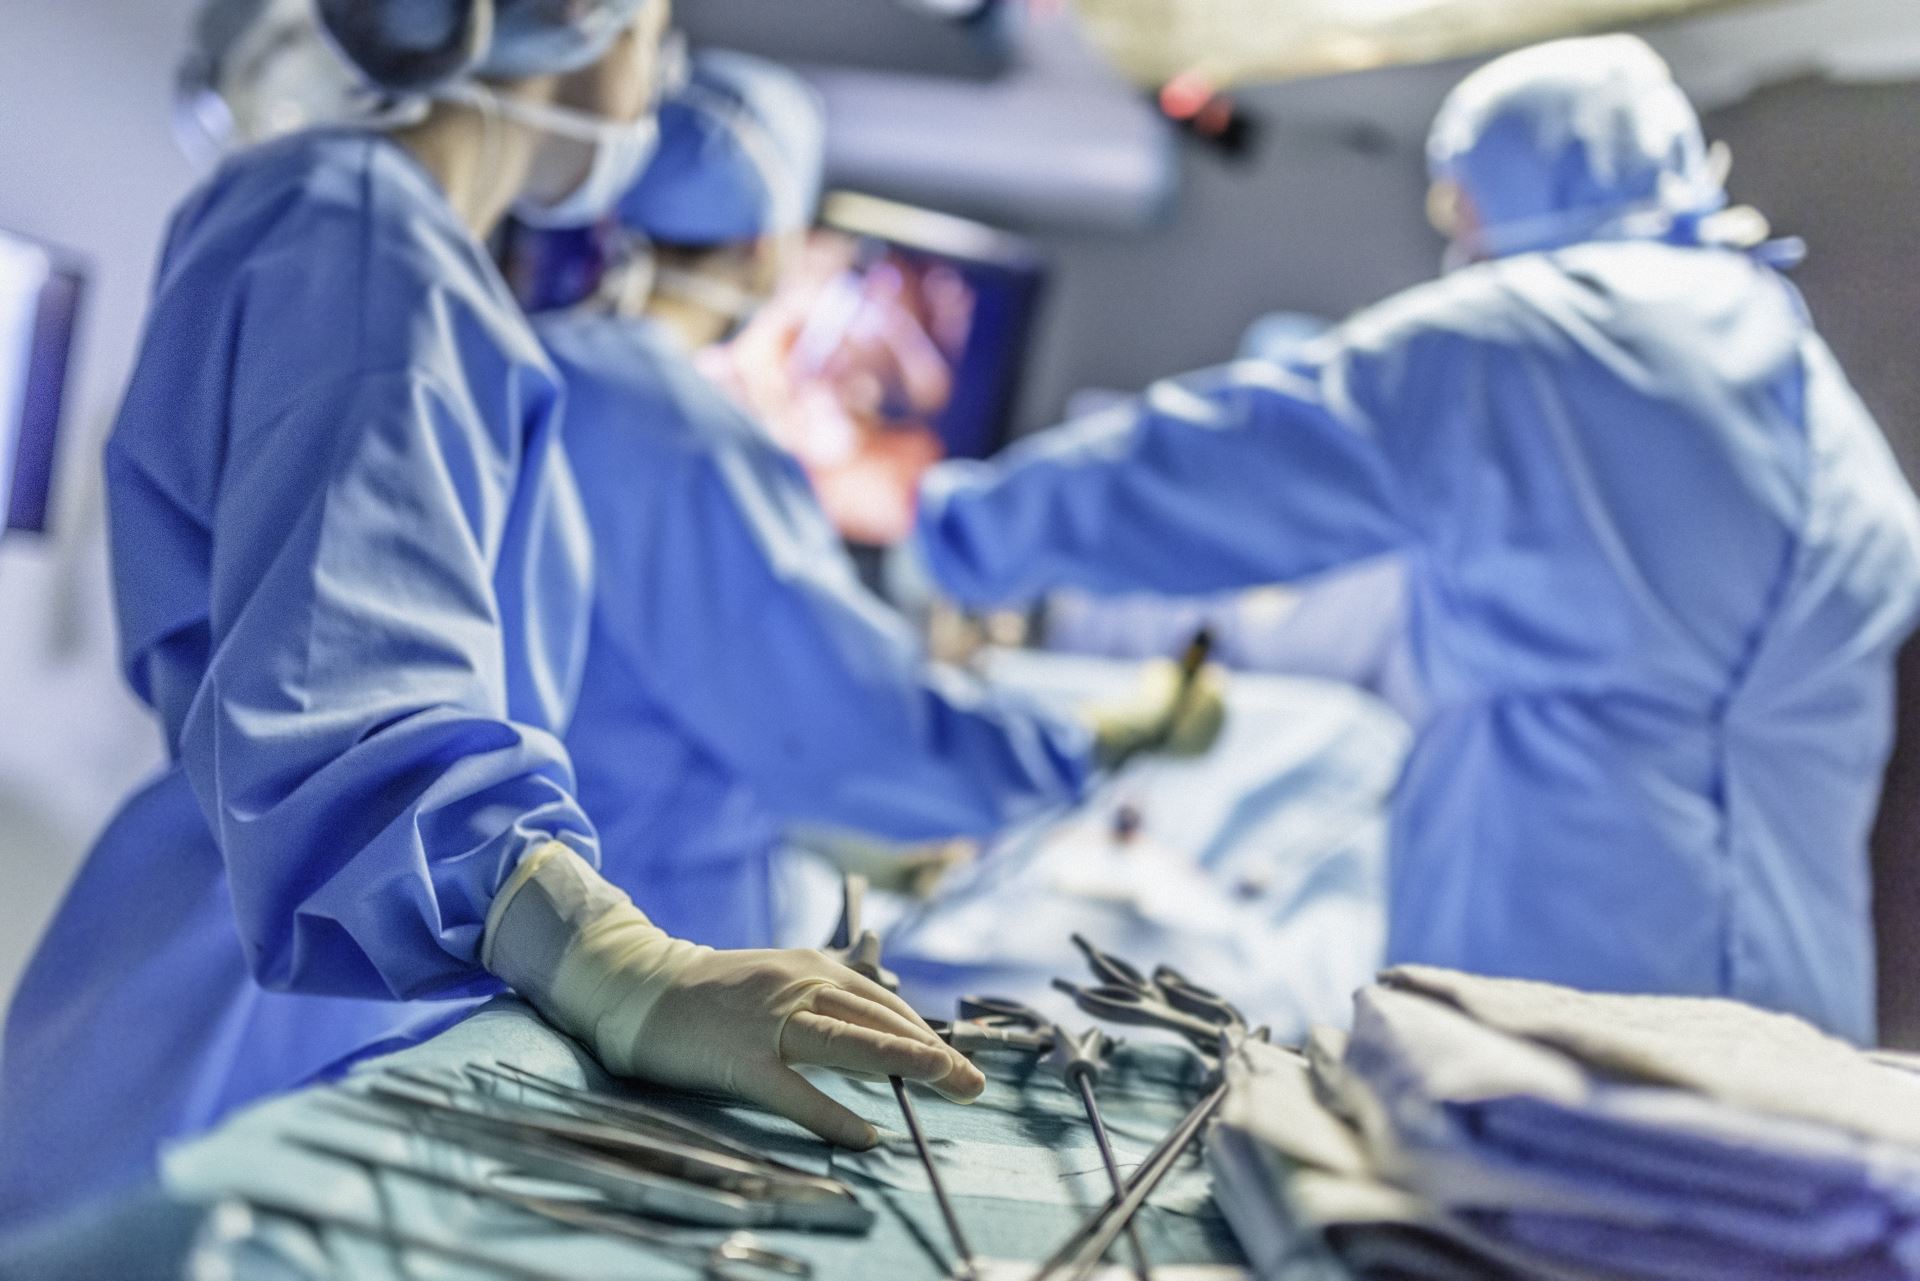 Patients have lower healthcare costs with female surgeons, study finds